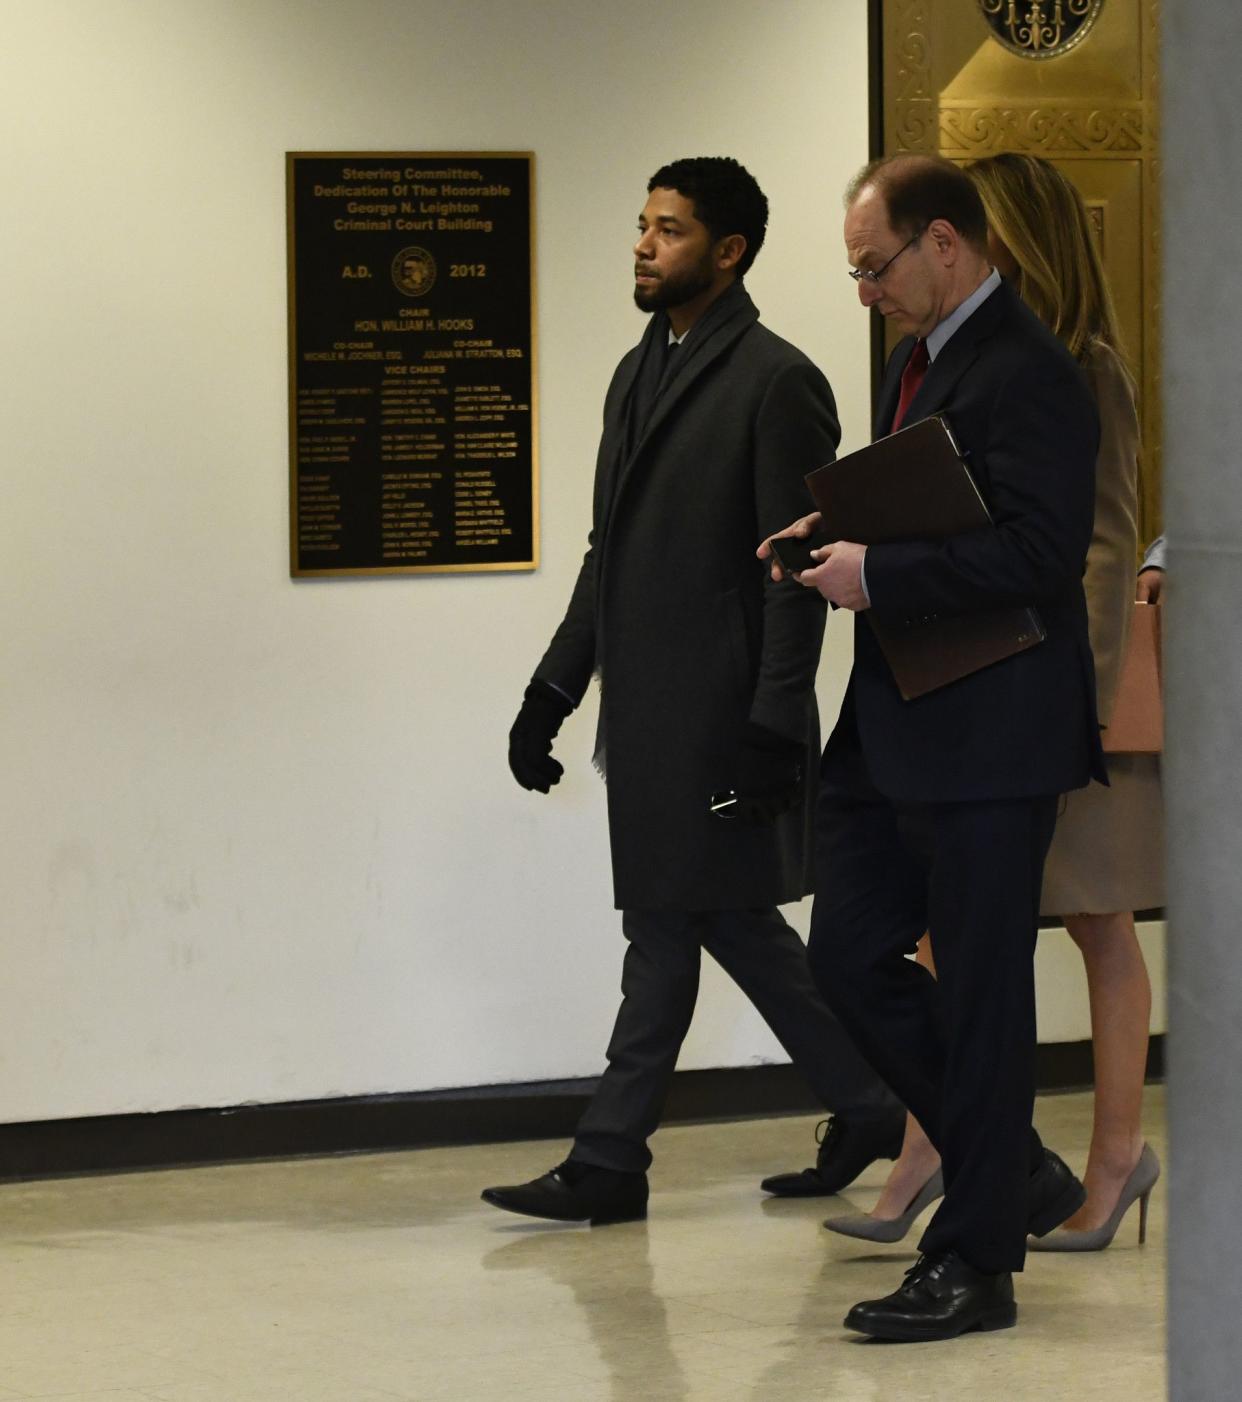 Empire actor Jussie Smollett enters the courtroom at Leighton Criminal Court Building on Tuesday, Mar. 12, 2019, in Chicago. A grand jury indicted Smollett last week on 16 felony counts.